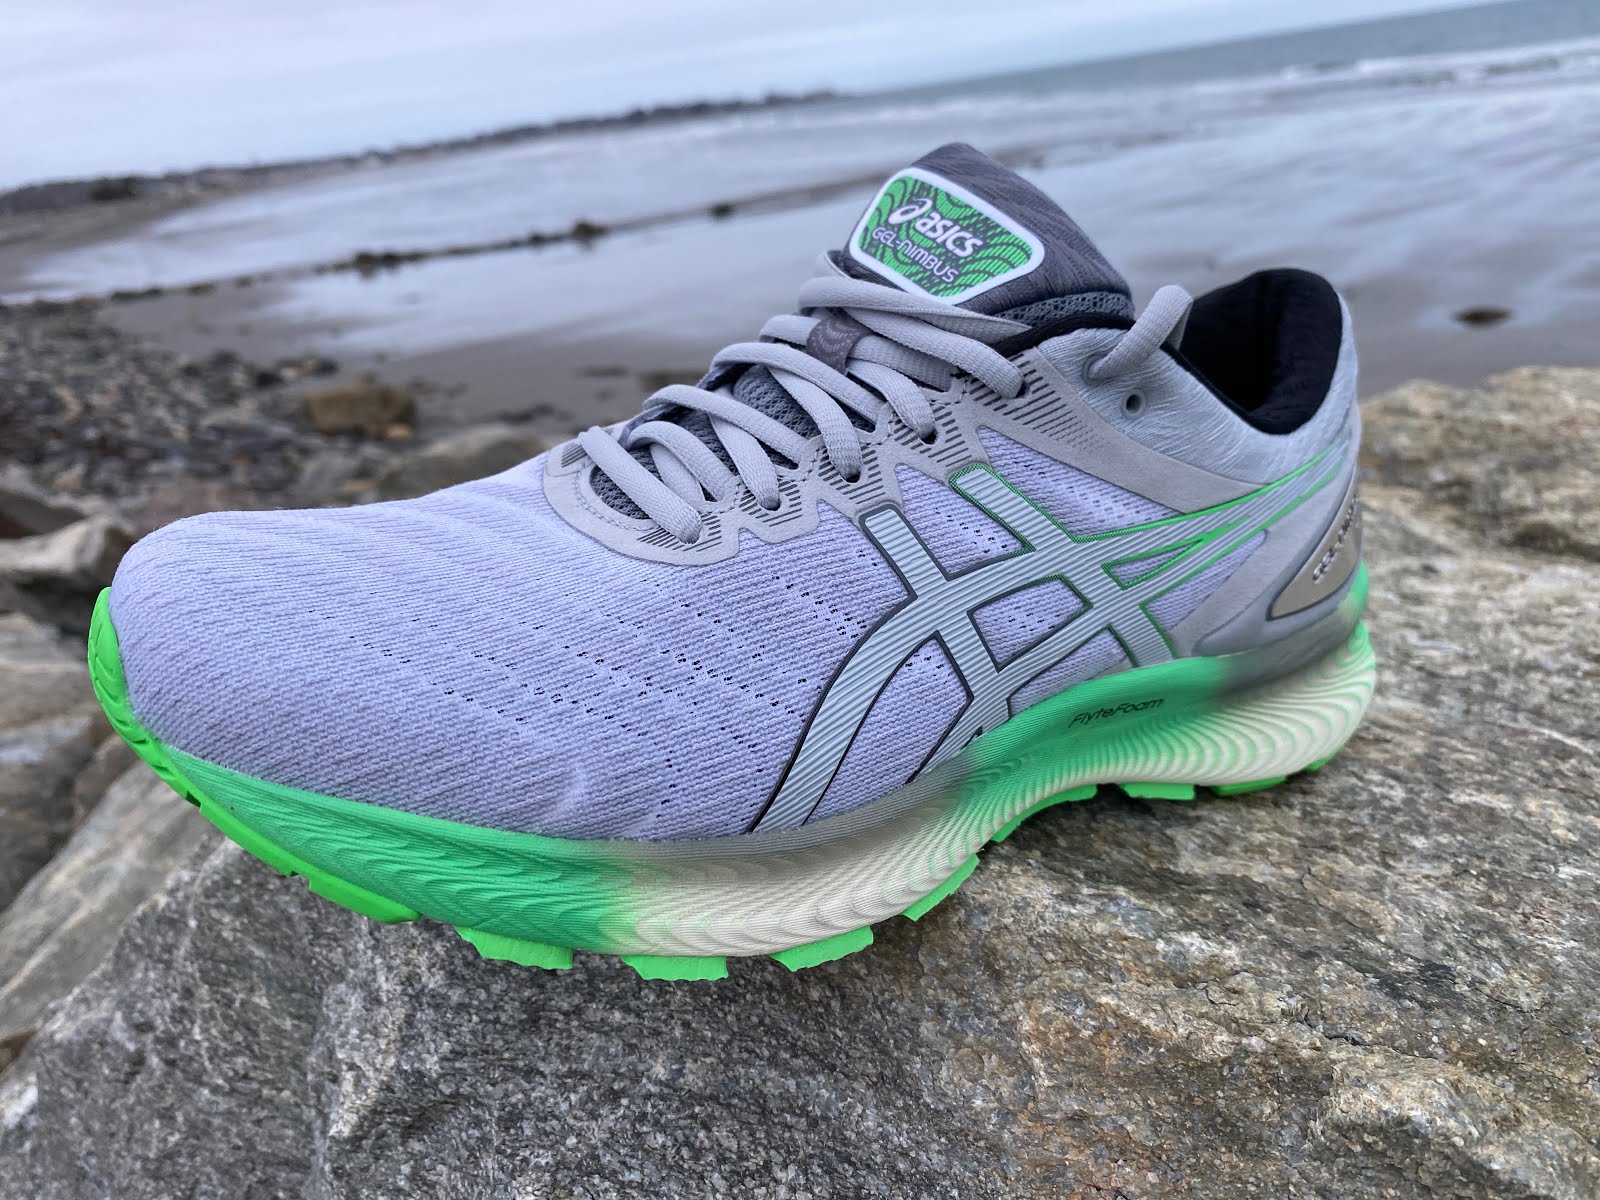 Road Trail Run: GEL-Nimbus Lite Run Impressions Video, Shoe Details and Comparisons. What a Fun, Sweet, Bouncy, Soft Ride!